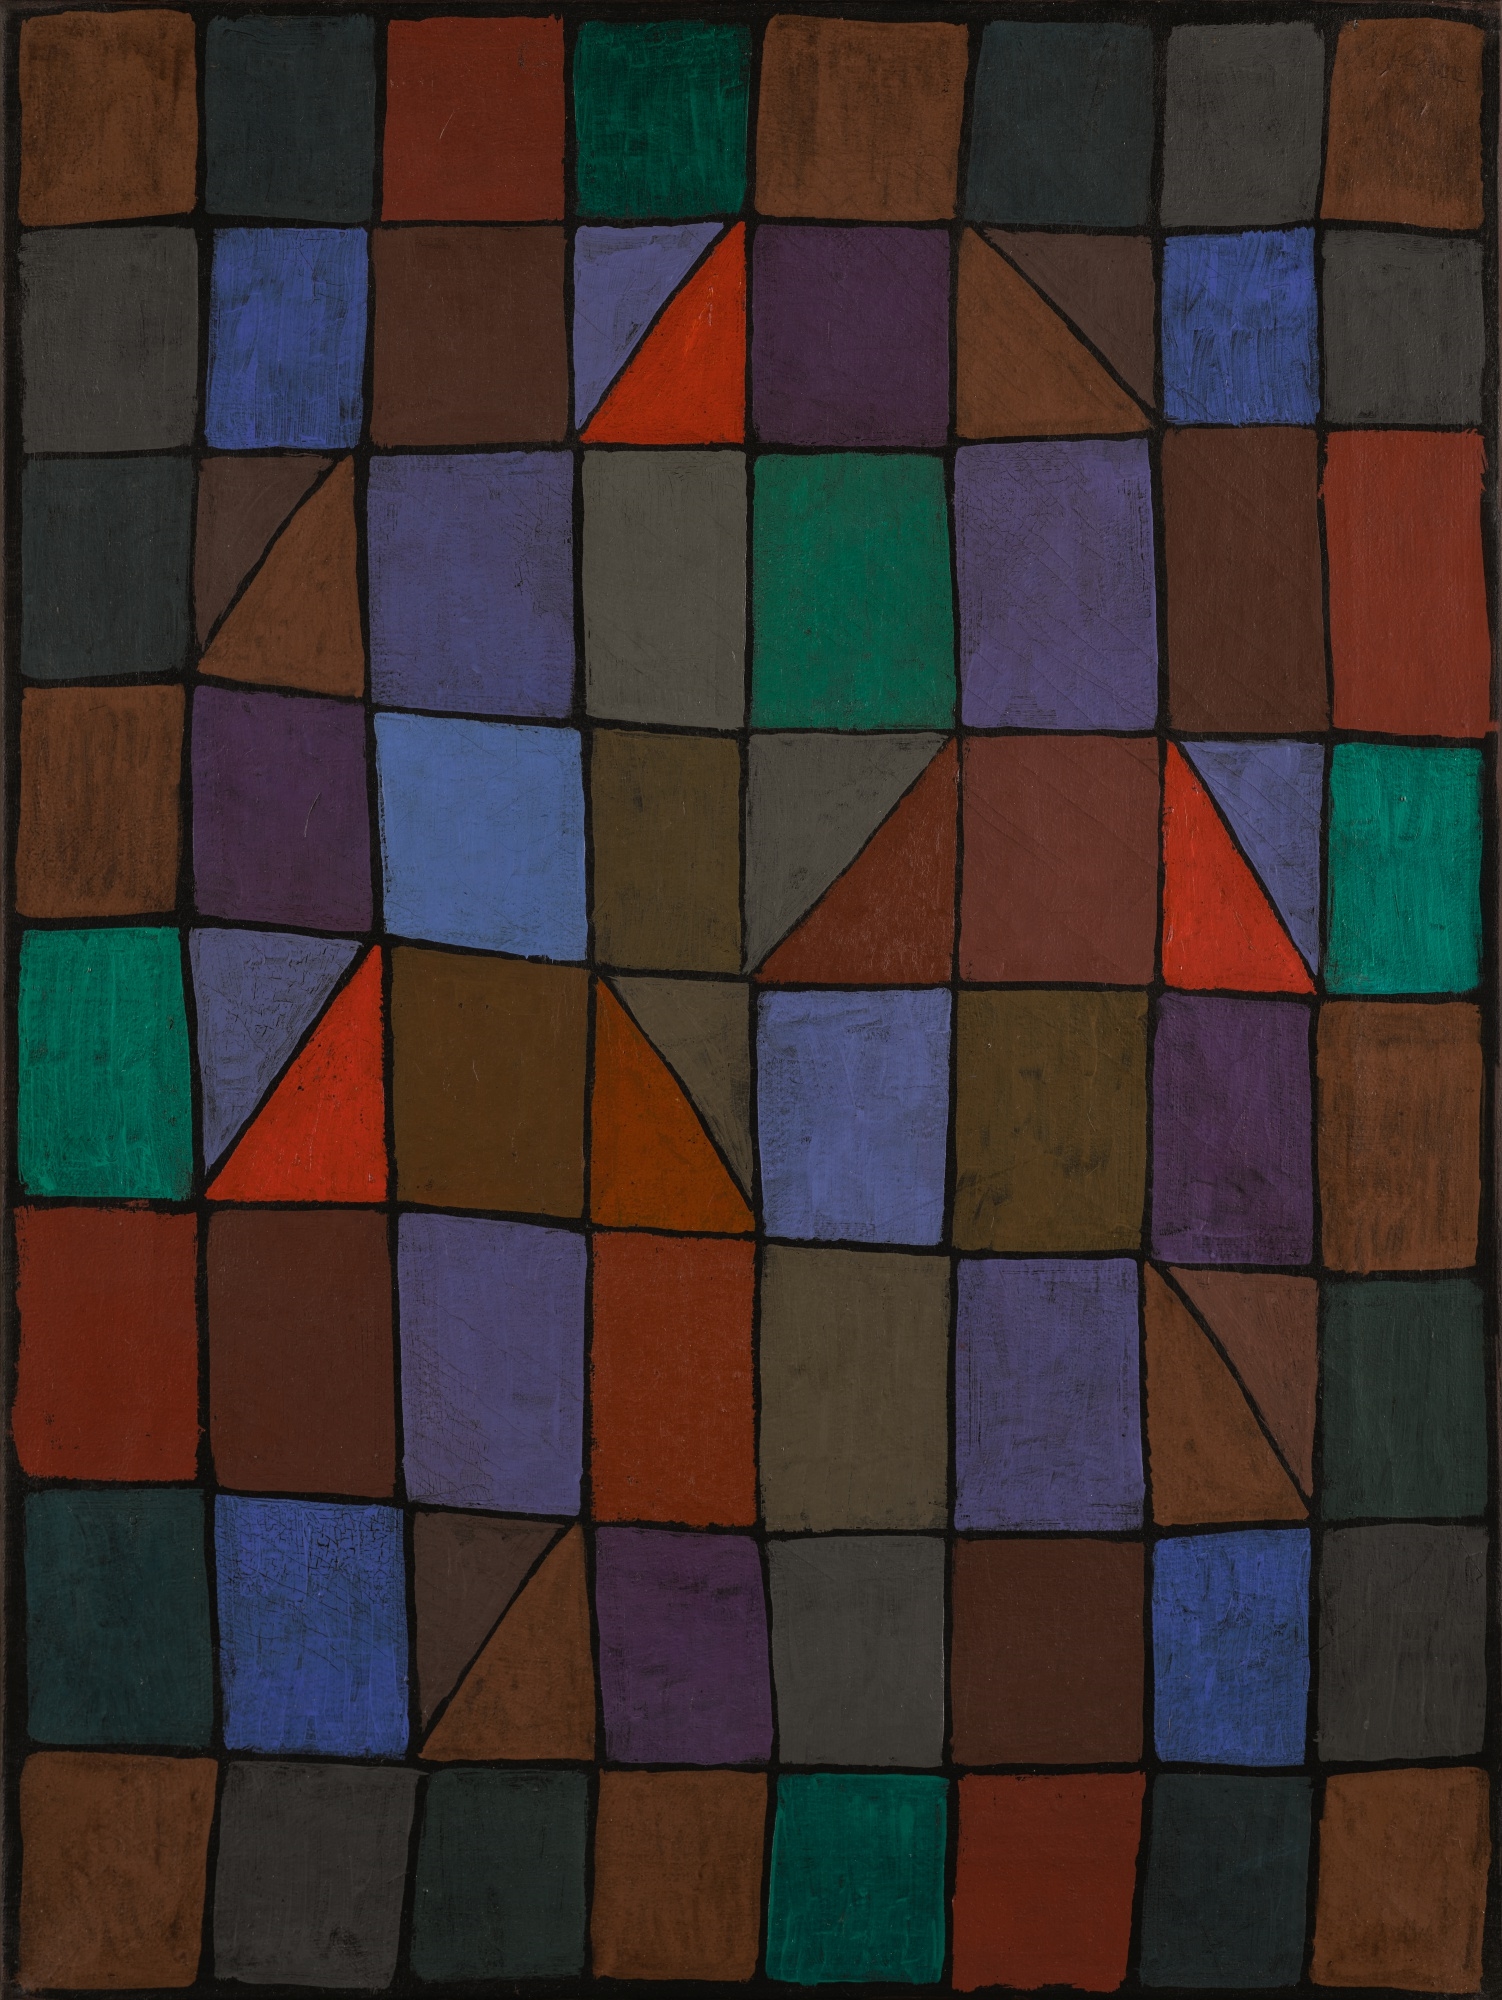 ABEND IN N (EVENING IN N) OR ARCHITEKTUR ABENDS (ARCHITECTURE IN THE EVENING) by Paul Klee, dated 1937 and inscribed 1937